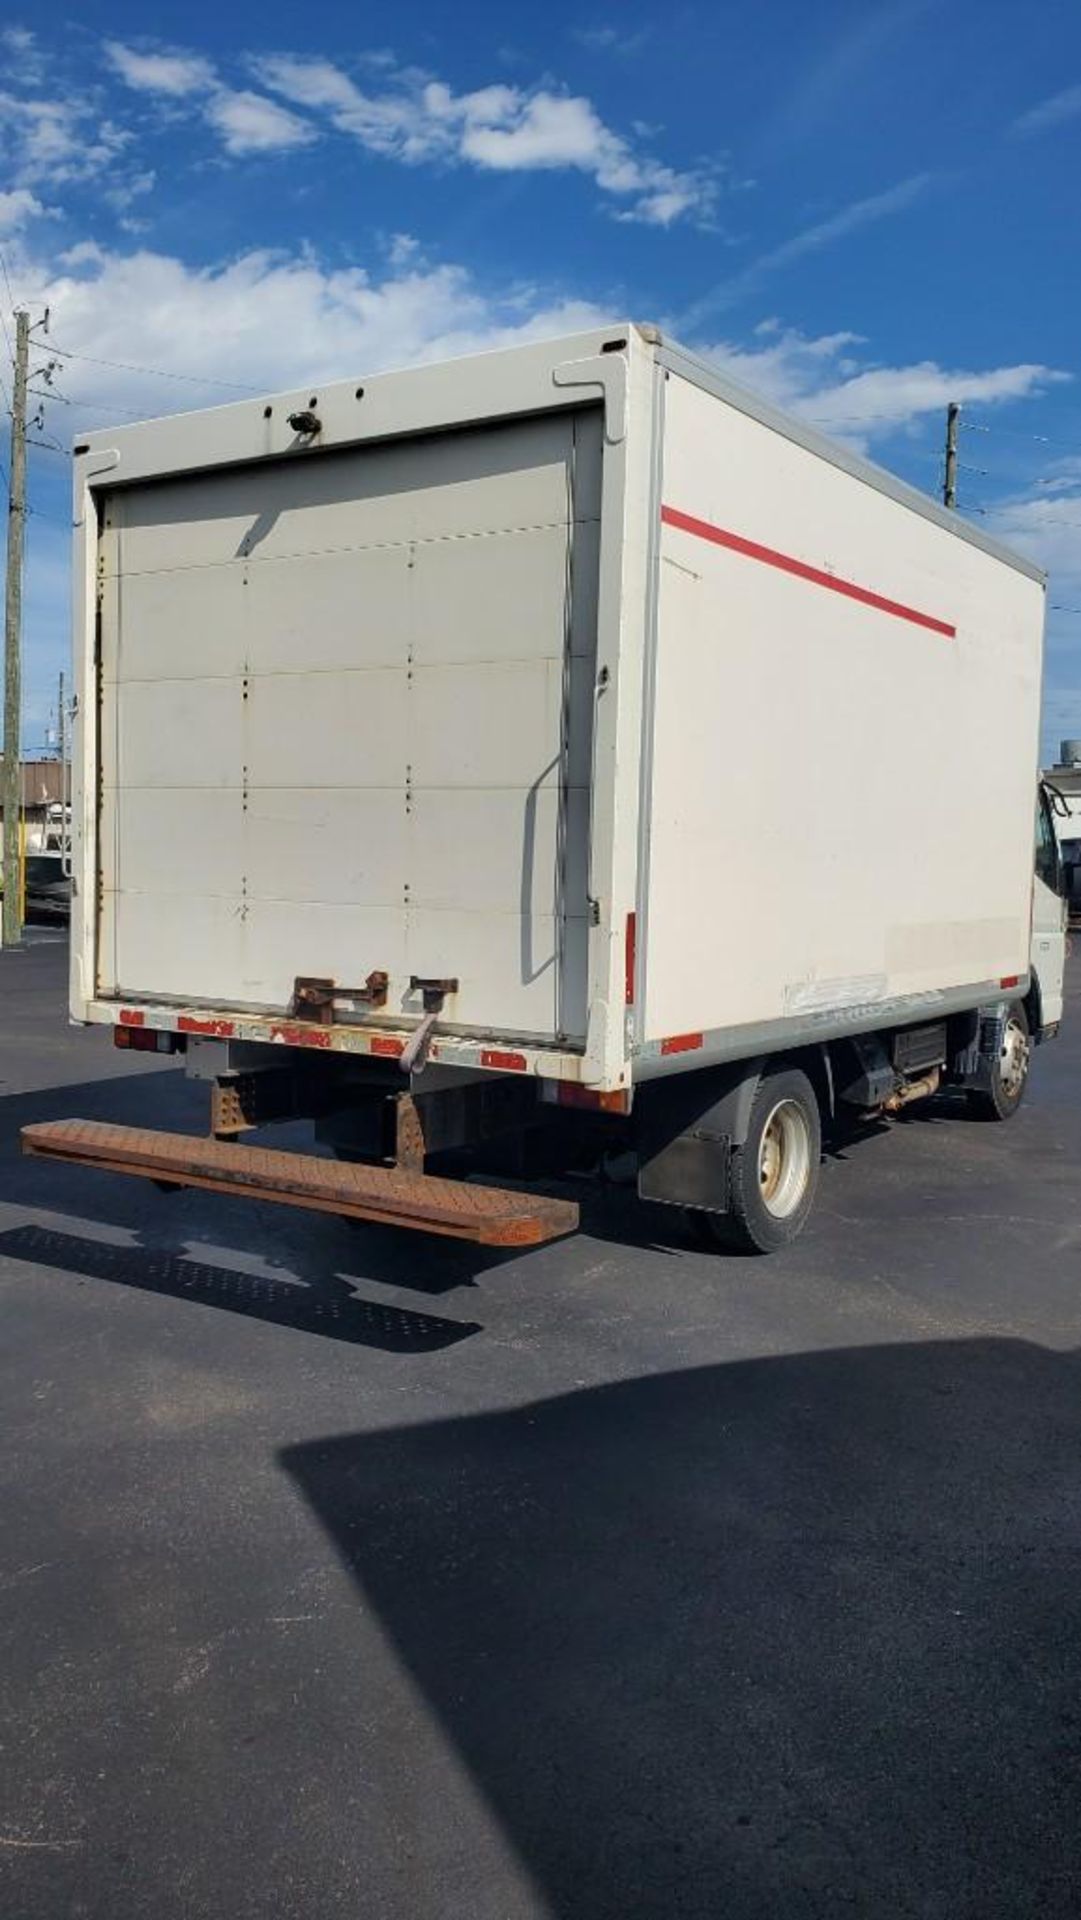 2015 MITSUBISHI FUSO FE180 BOX TRUCK APPROX 14' BOX, DIESEL ENGINE, AUTOMATIC TRANSMISSION - Image 4 of 39